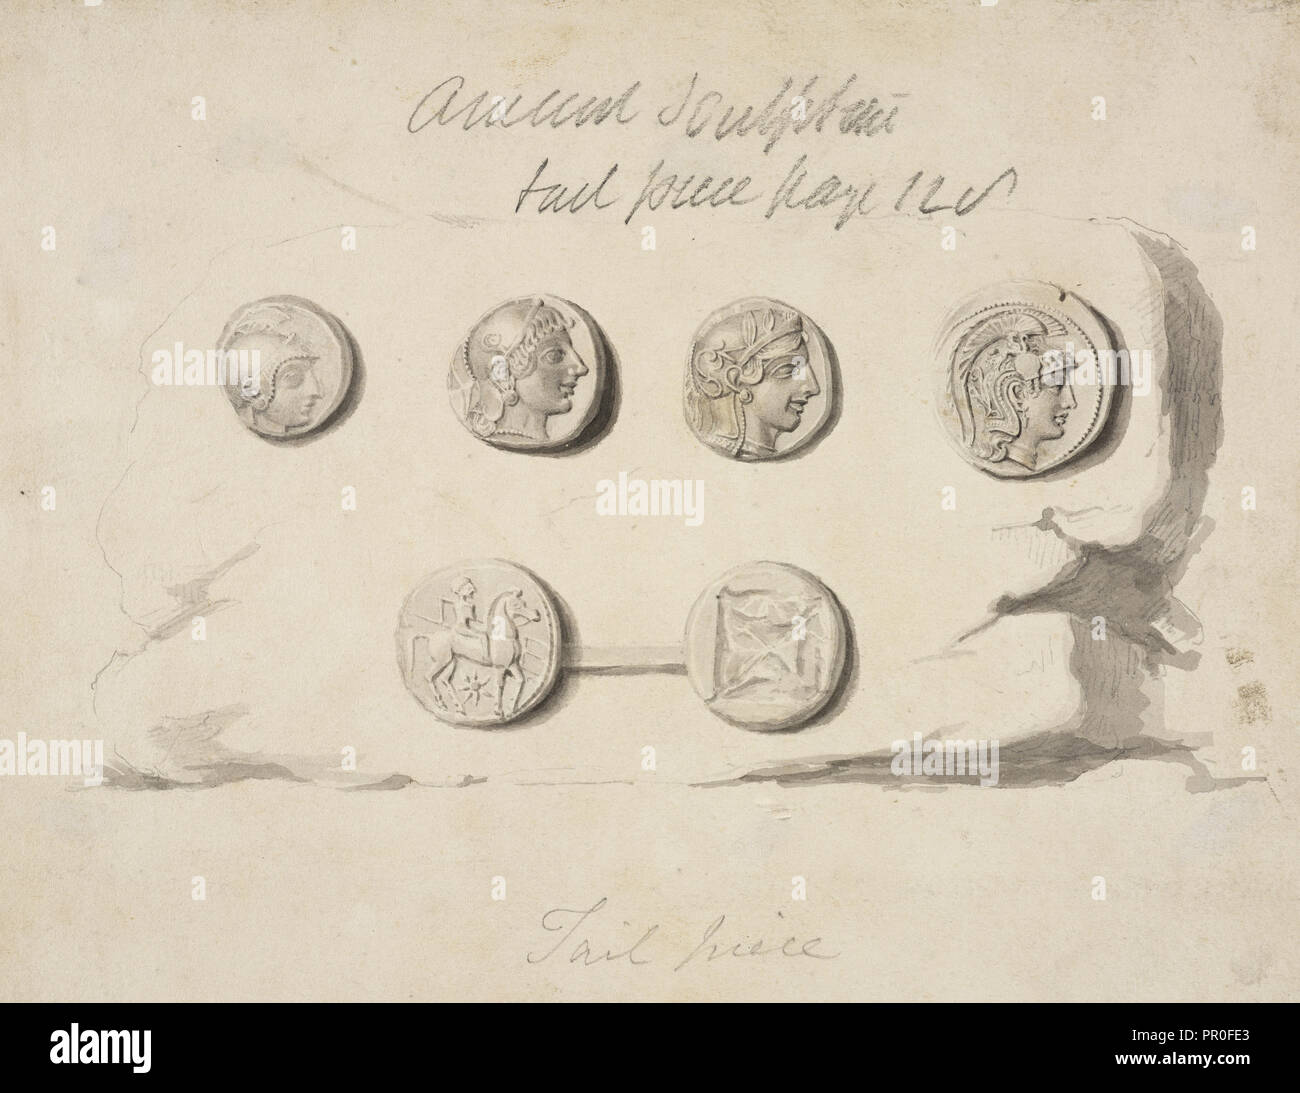 Six seals or coins, Society of Dilettanti drawings, prints, and letters, 1806-1880, Wash on paper, between 1809 and 1835 Stock Photo